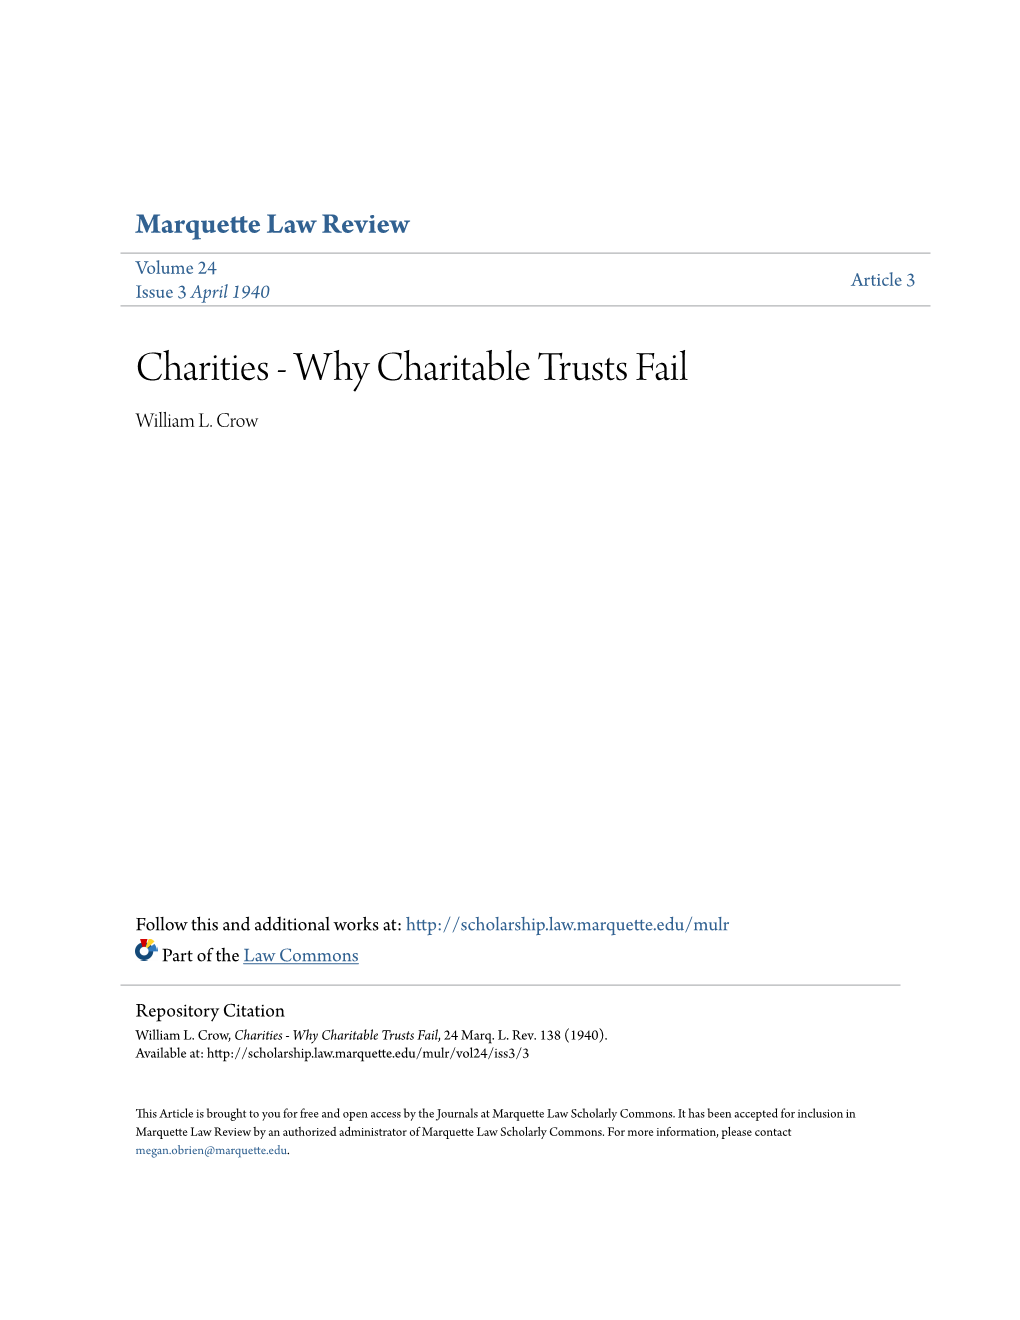 Charities - Why Charitable Trusts Fail William L